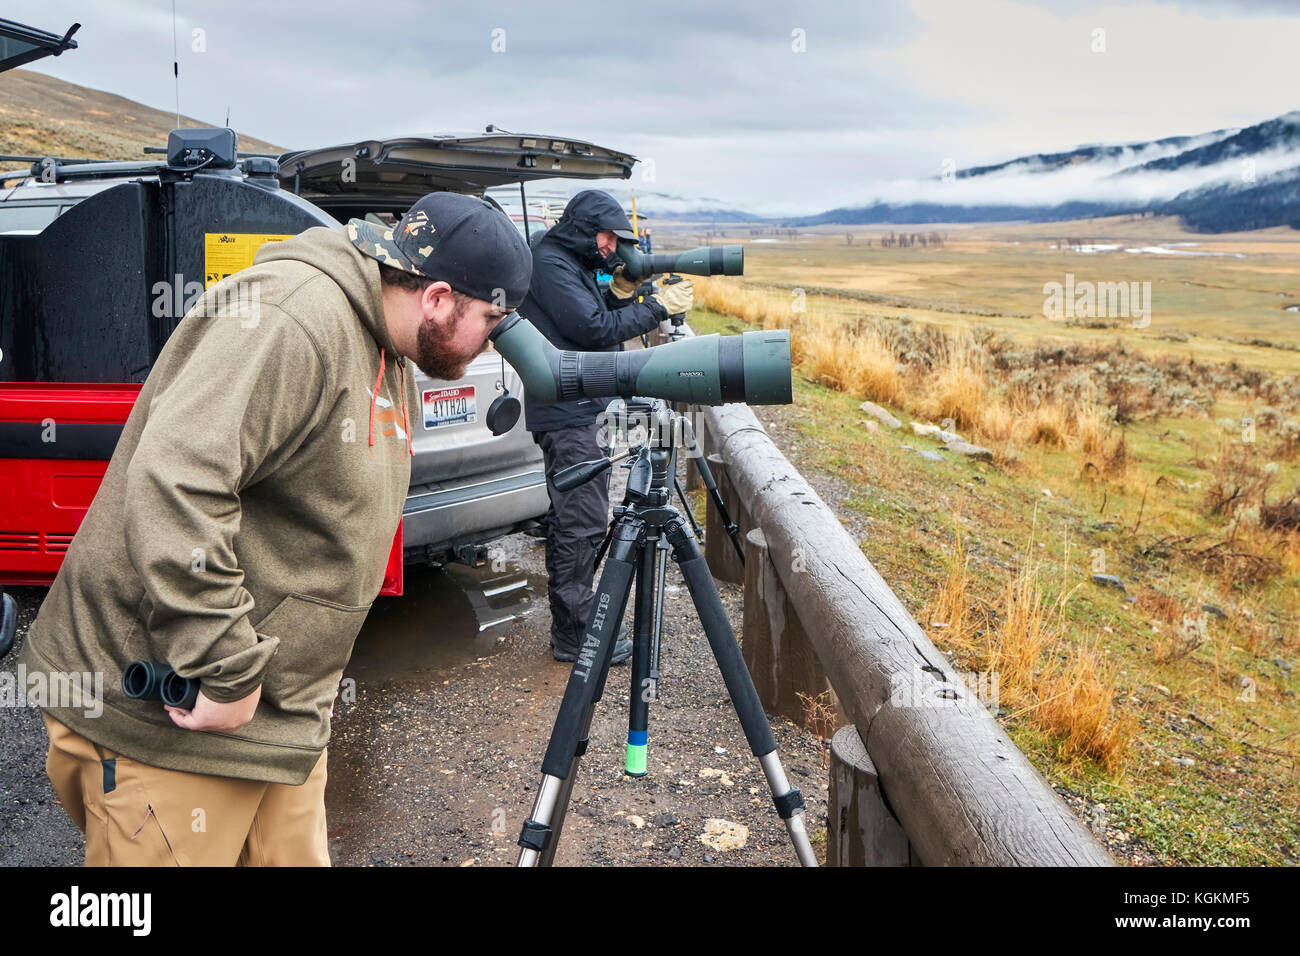 Yellowstone National Park, Wyoming, USA - October 29, 2016: Wildlife watchers observe wolfs in a cold rainy day. Stock Photo